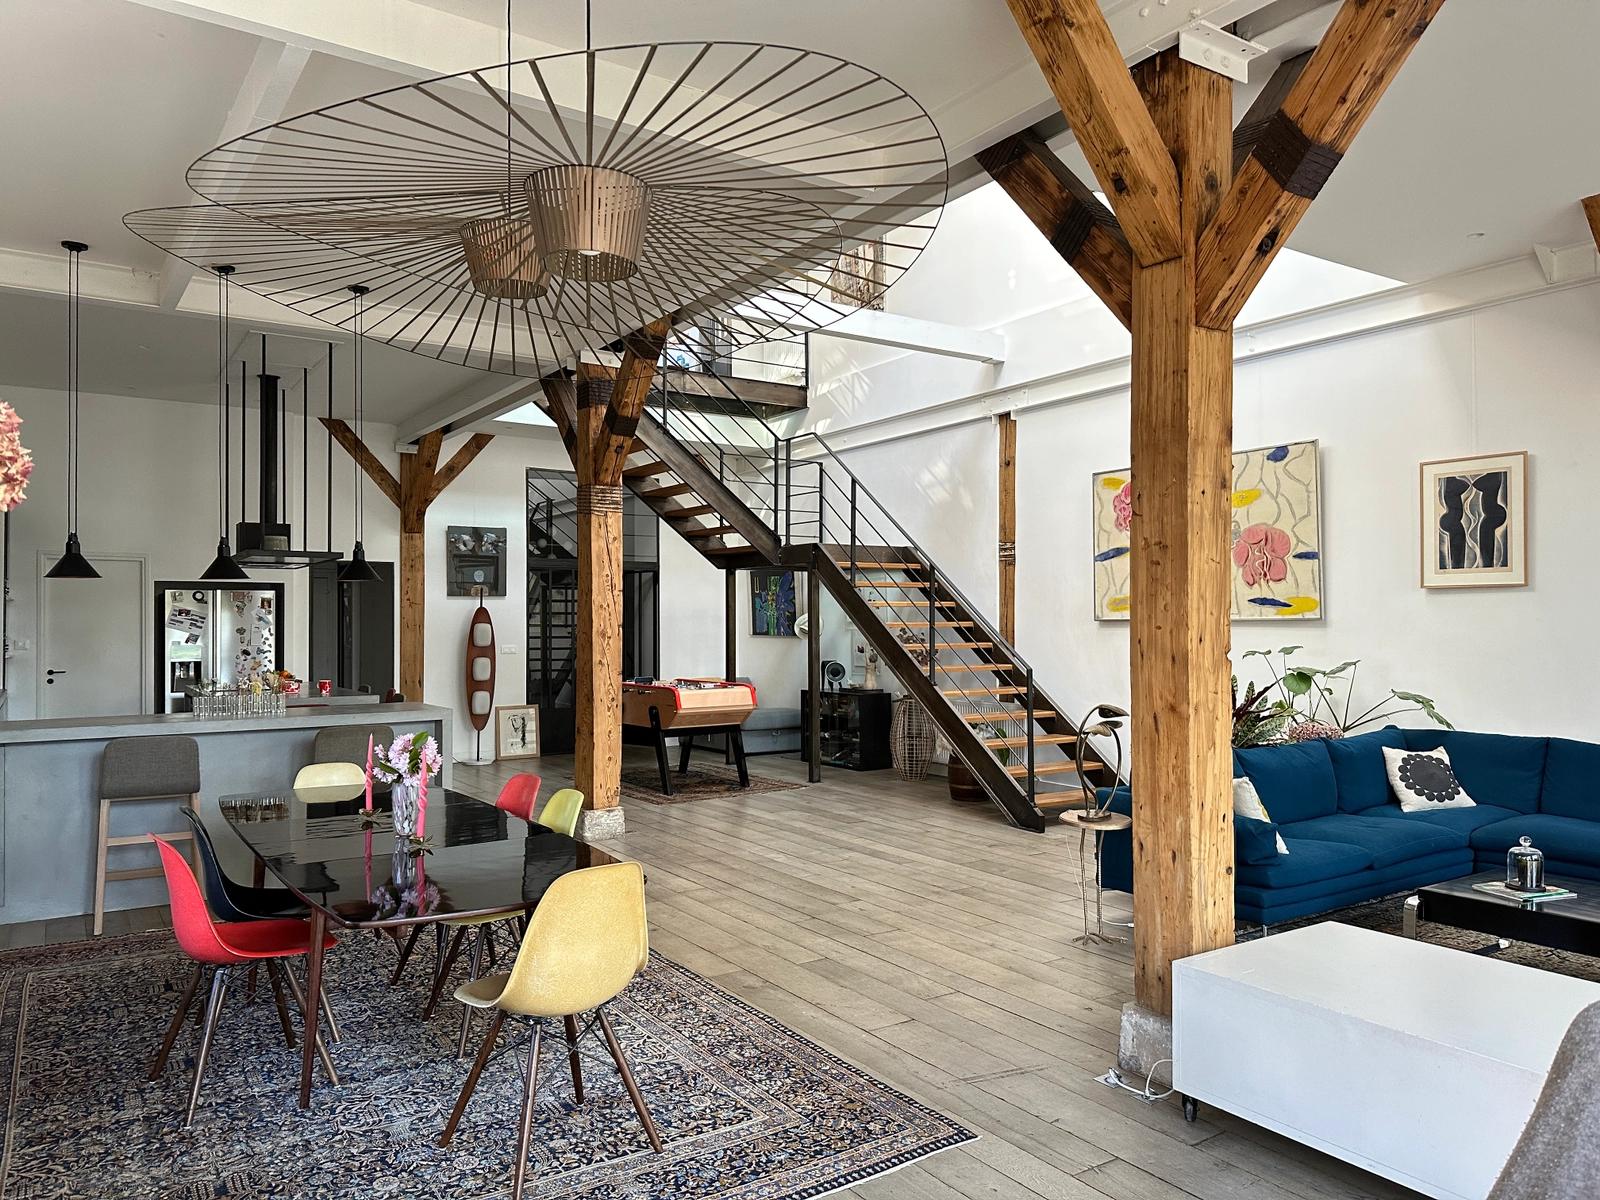 Space Warmly decorated industrial loft - 5